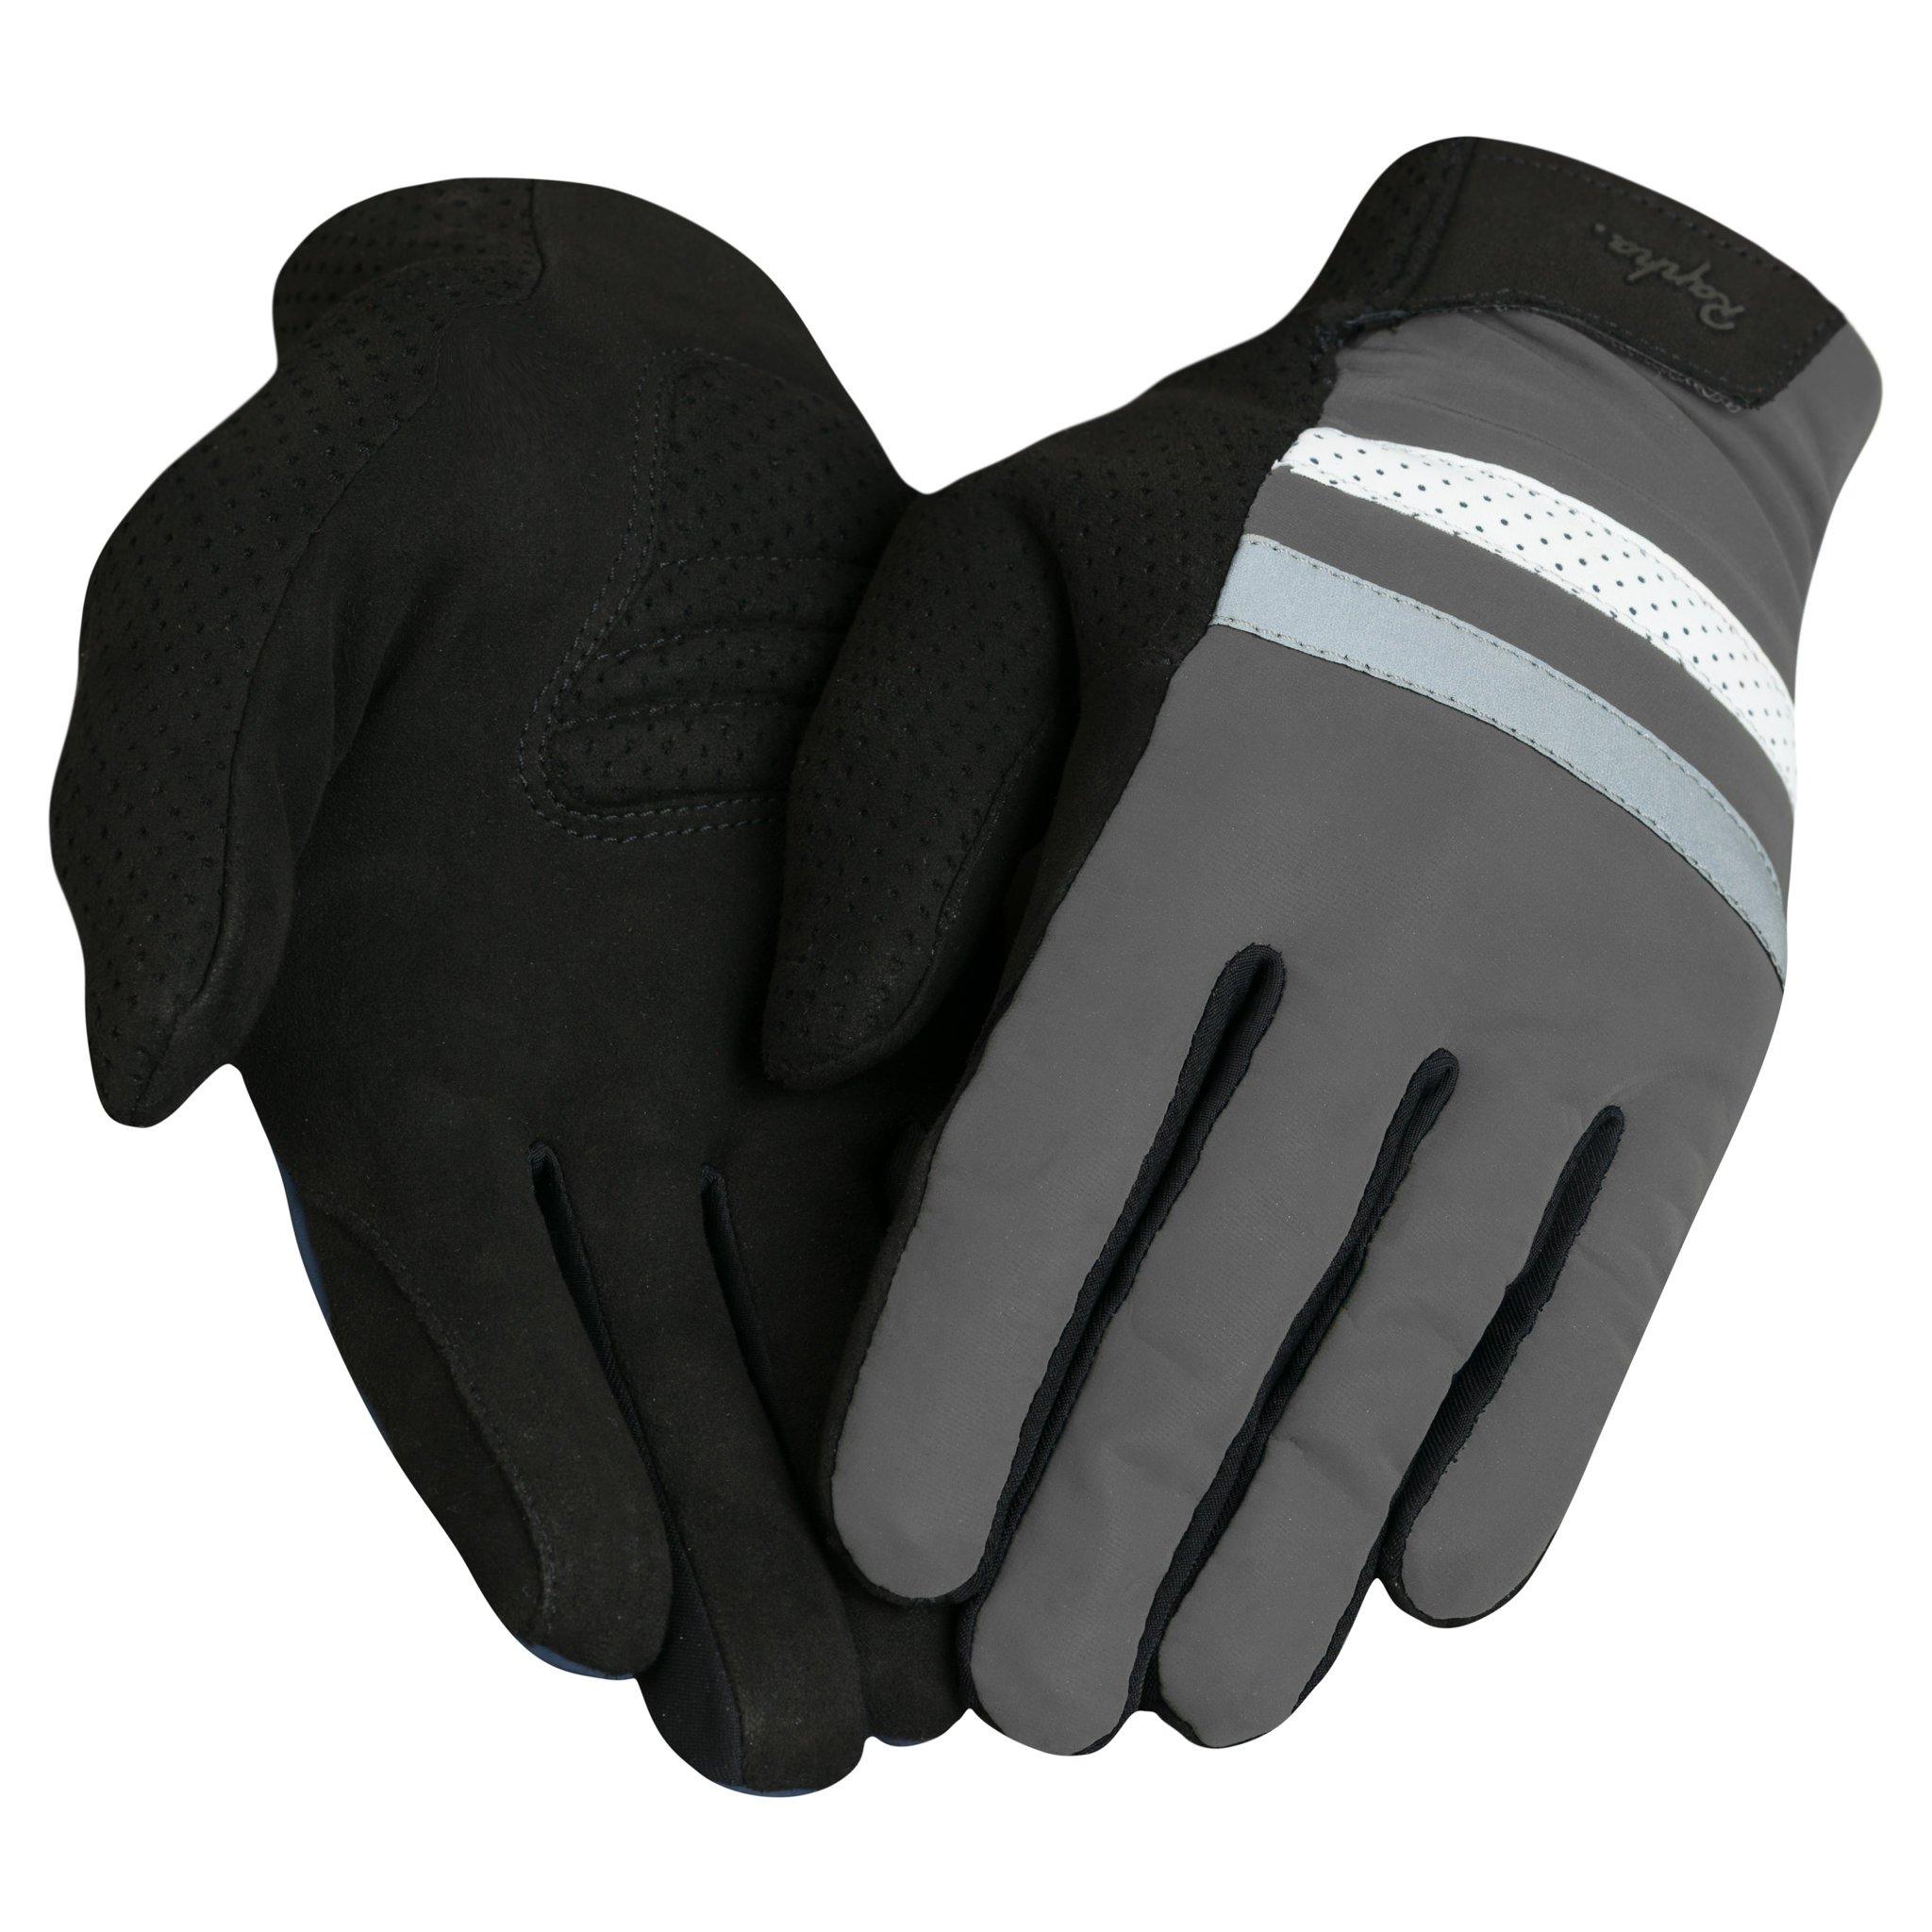 Winter Gloves for Reflective Reflective and | | Gloves Brevet Men\'s Commuting Rapha Riding Cycling